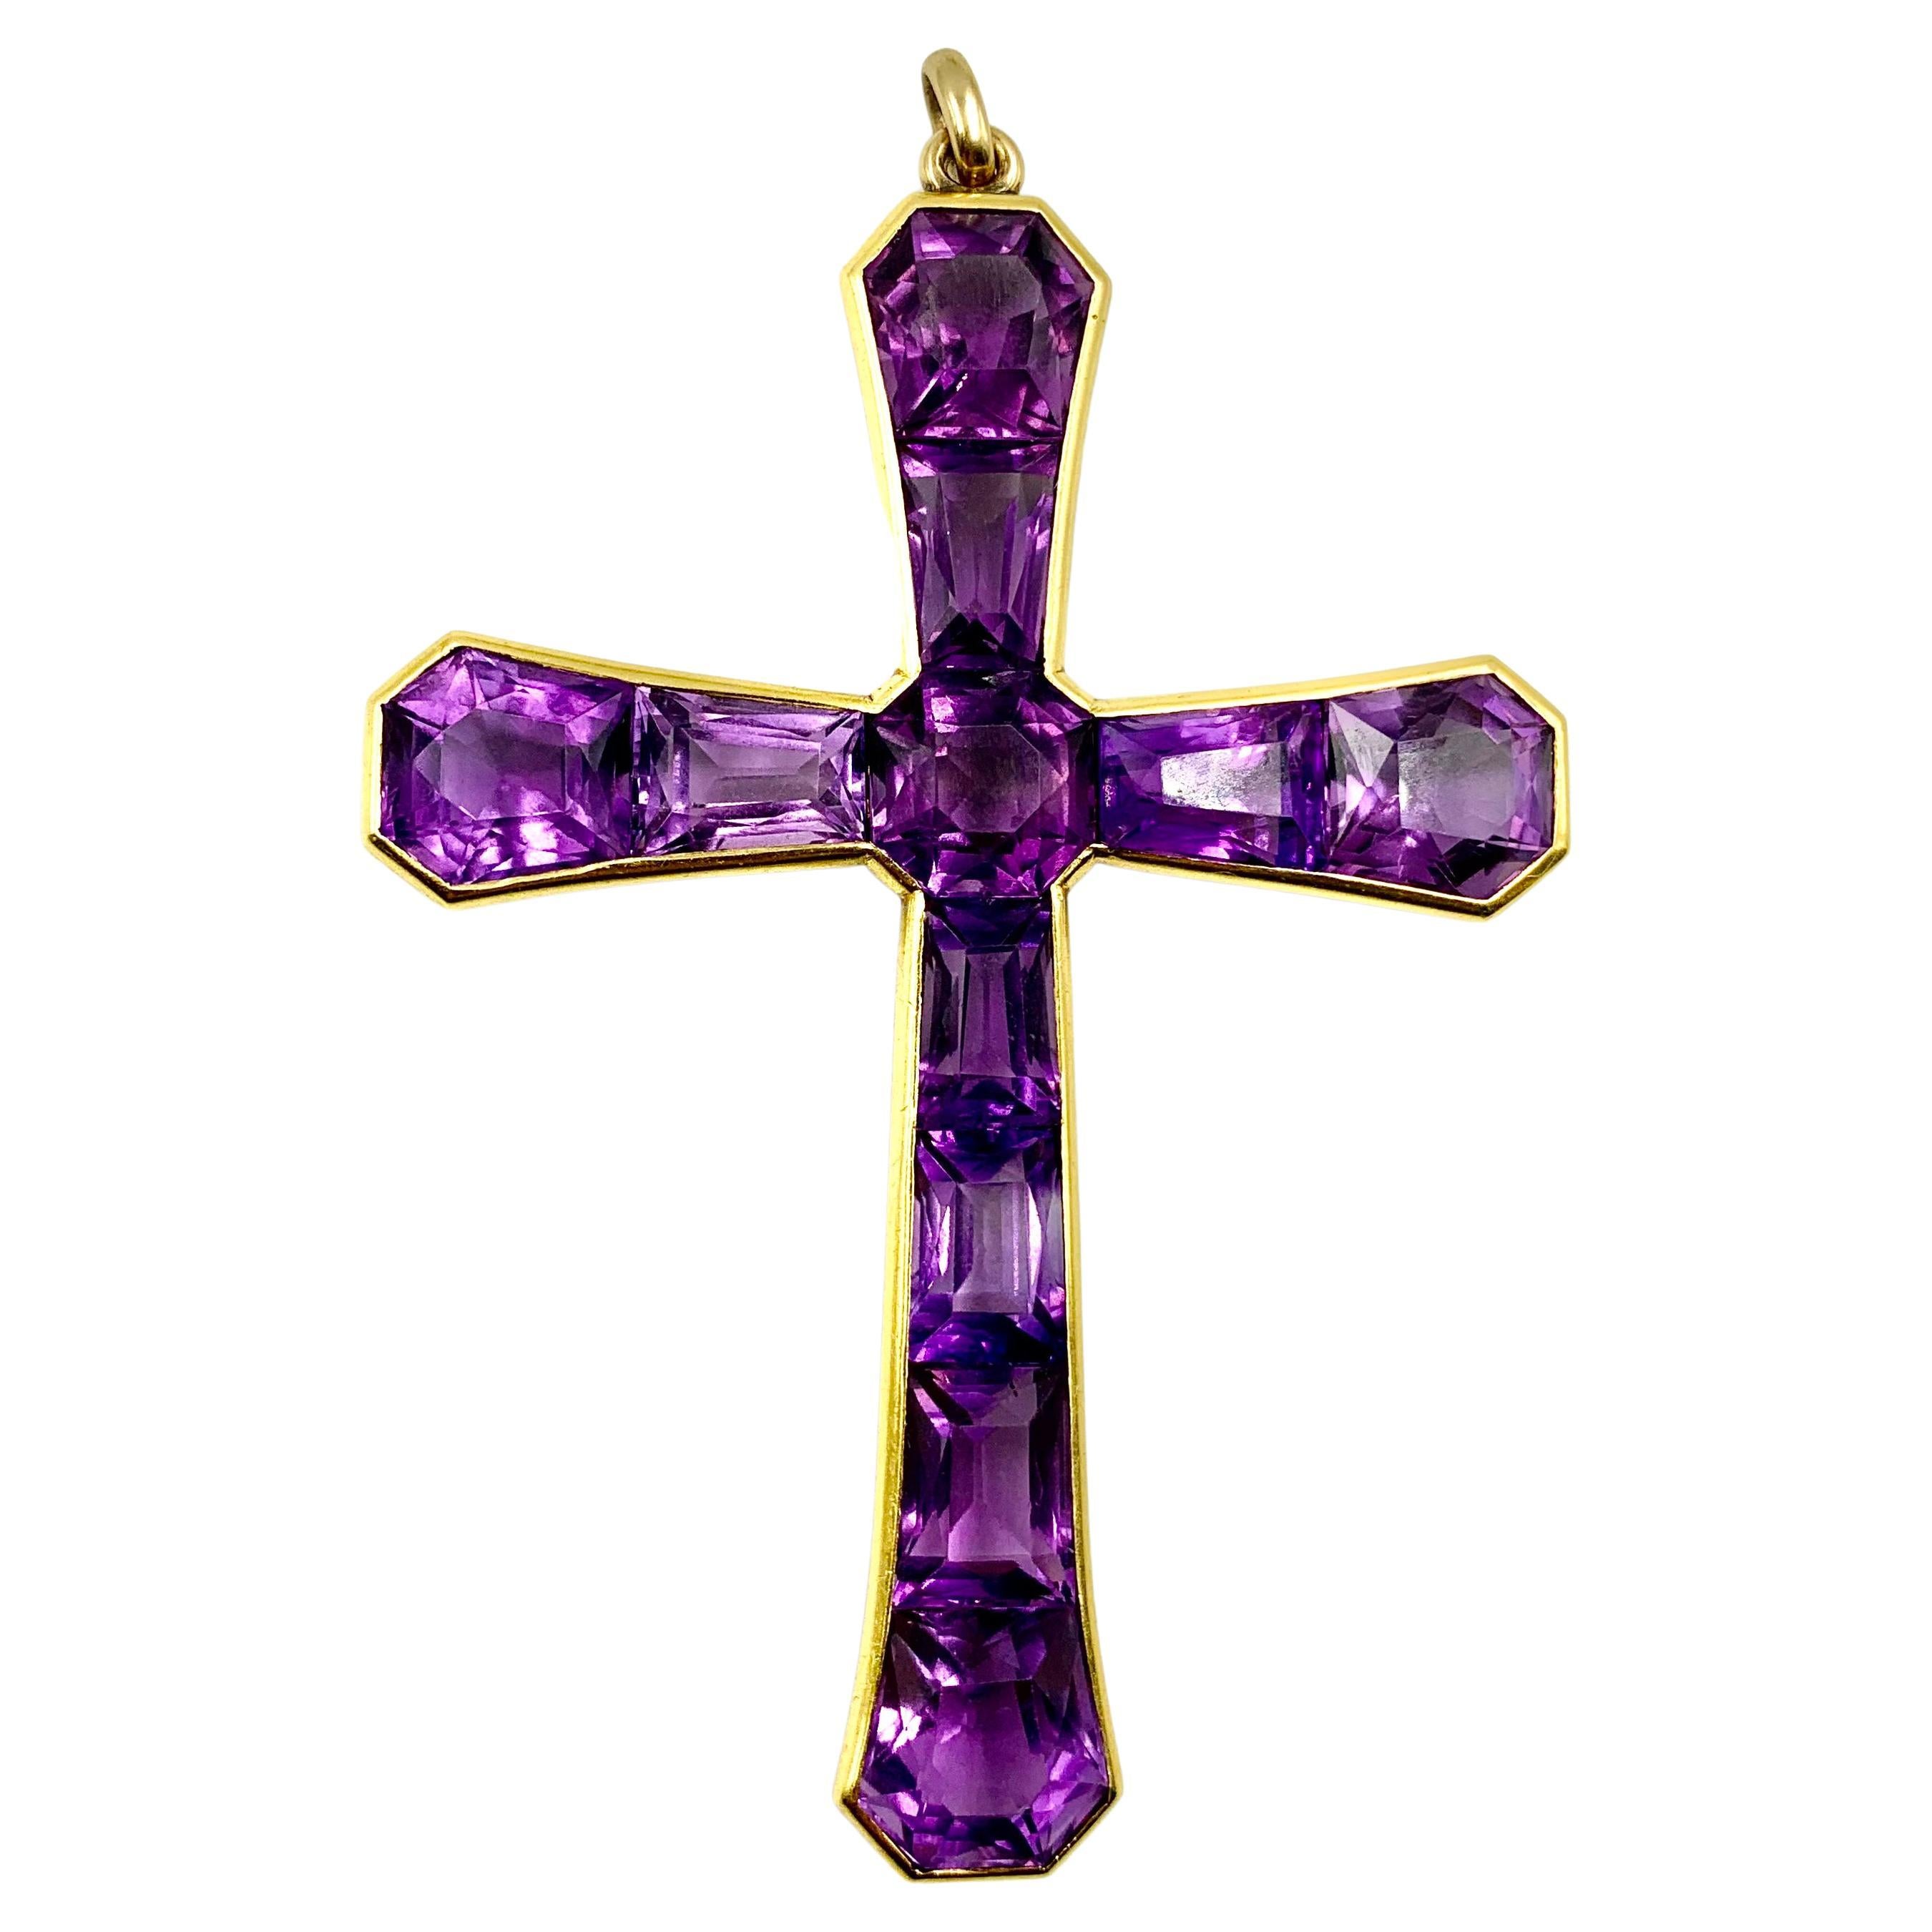 Large Early 19th Century Georgian 18K Gold Invisibly Set Faceted Amethyst Cross